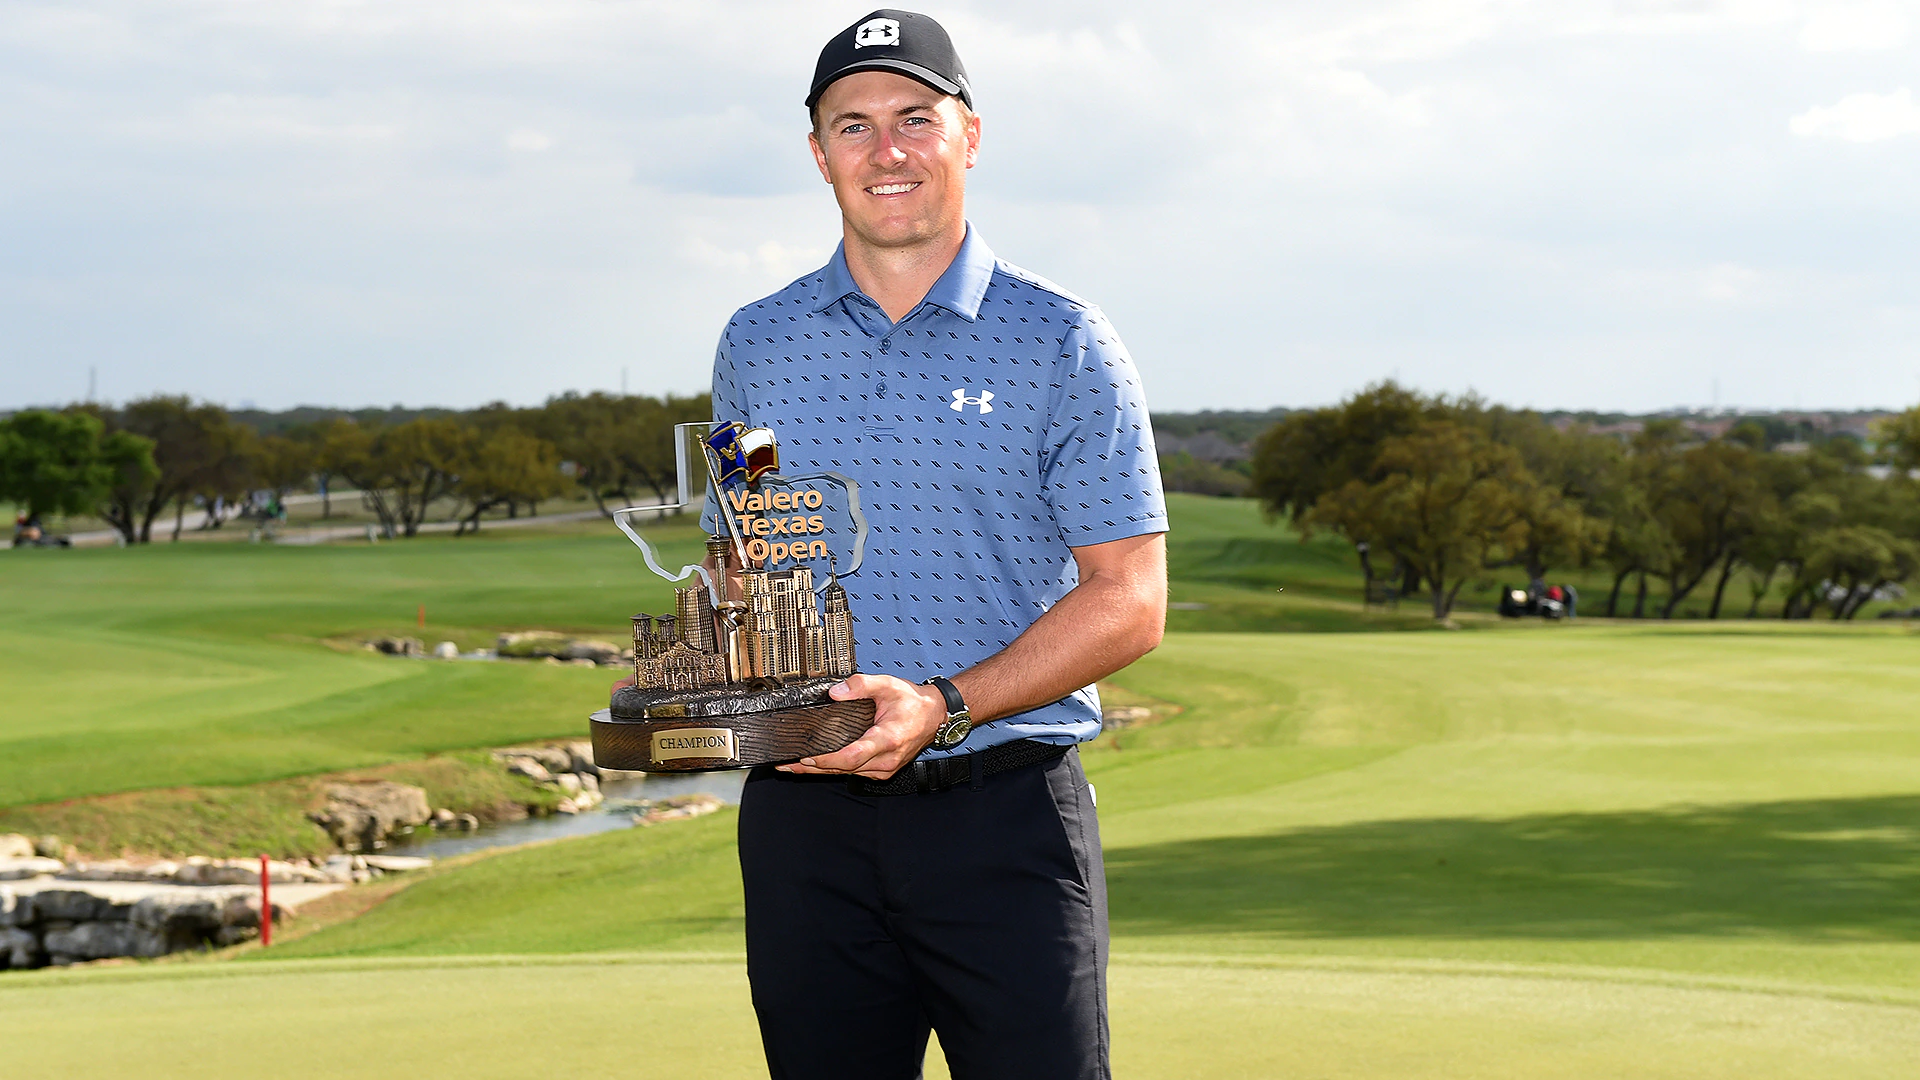 Jordan Spieth ends victory drought with ‘monumental win’ at Texas Open